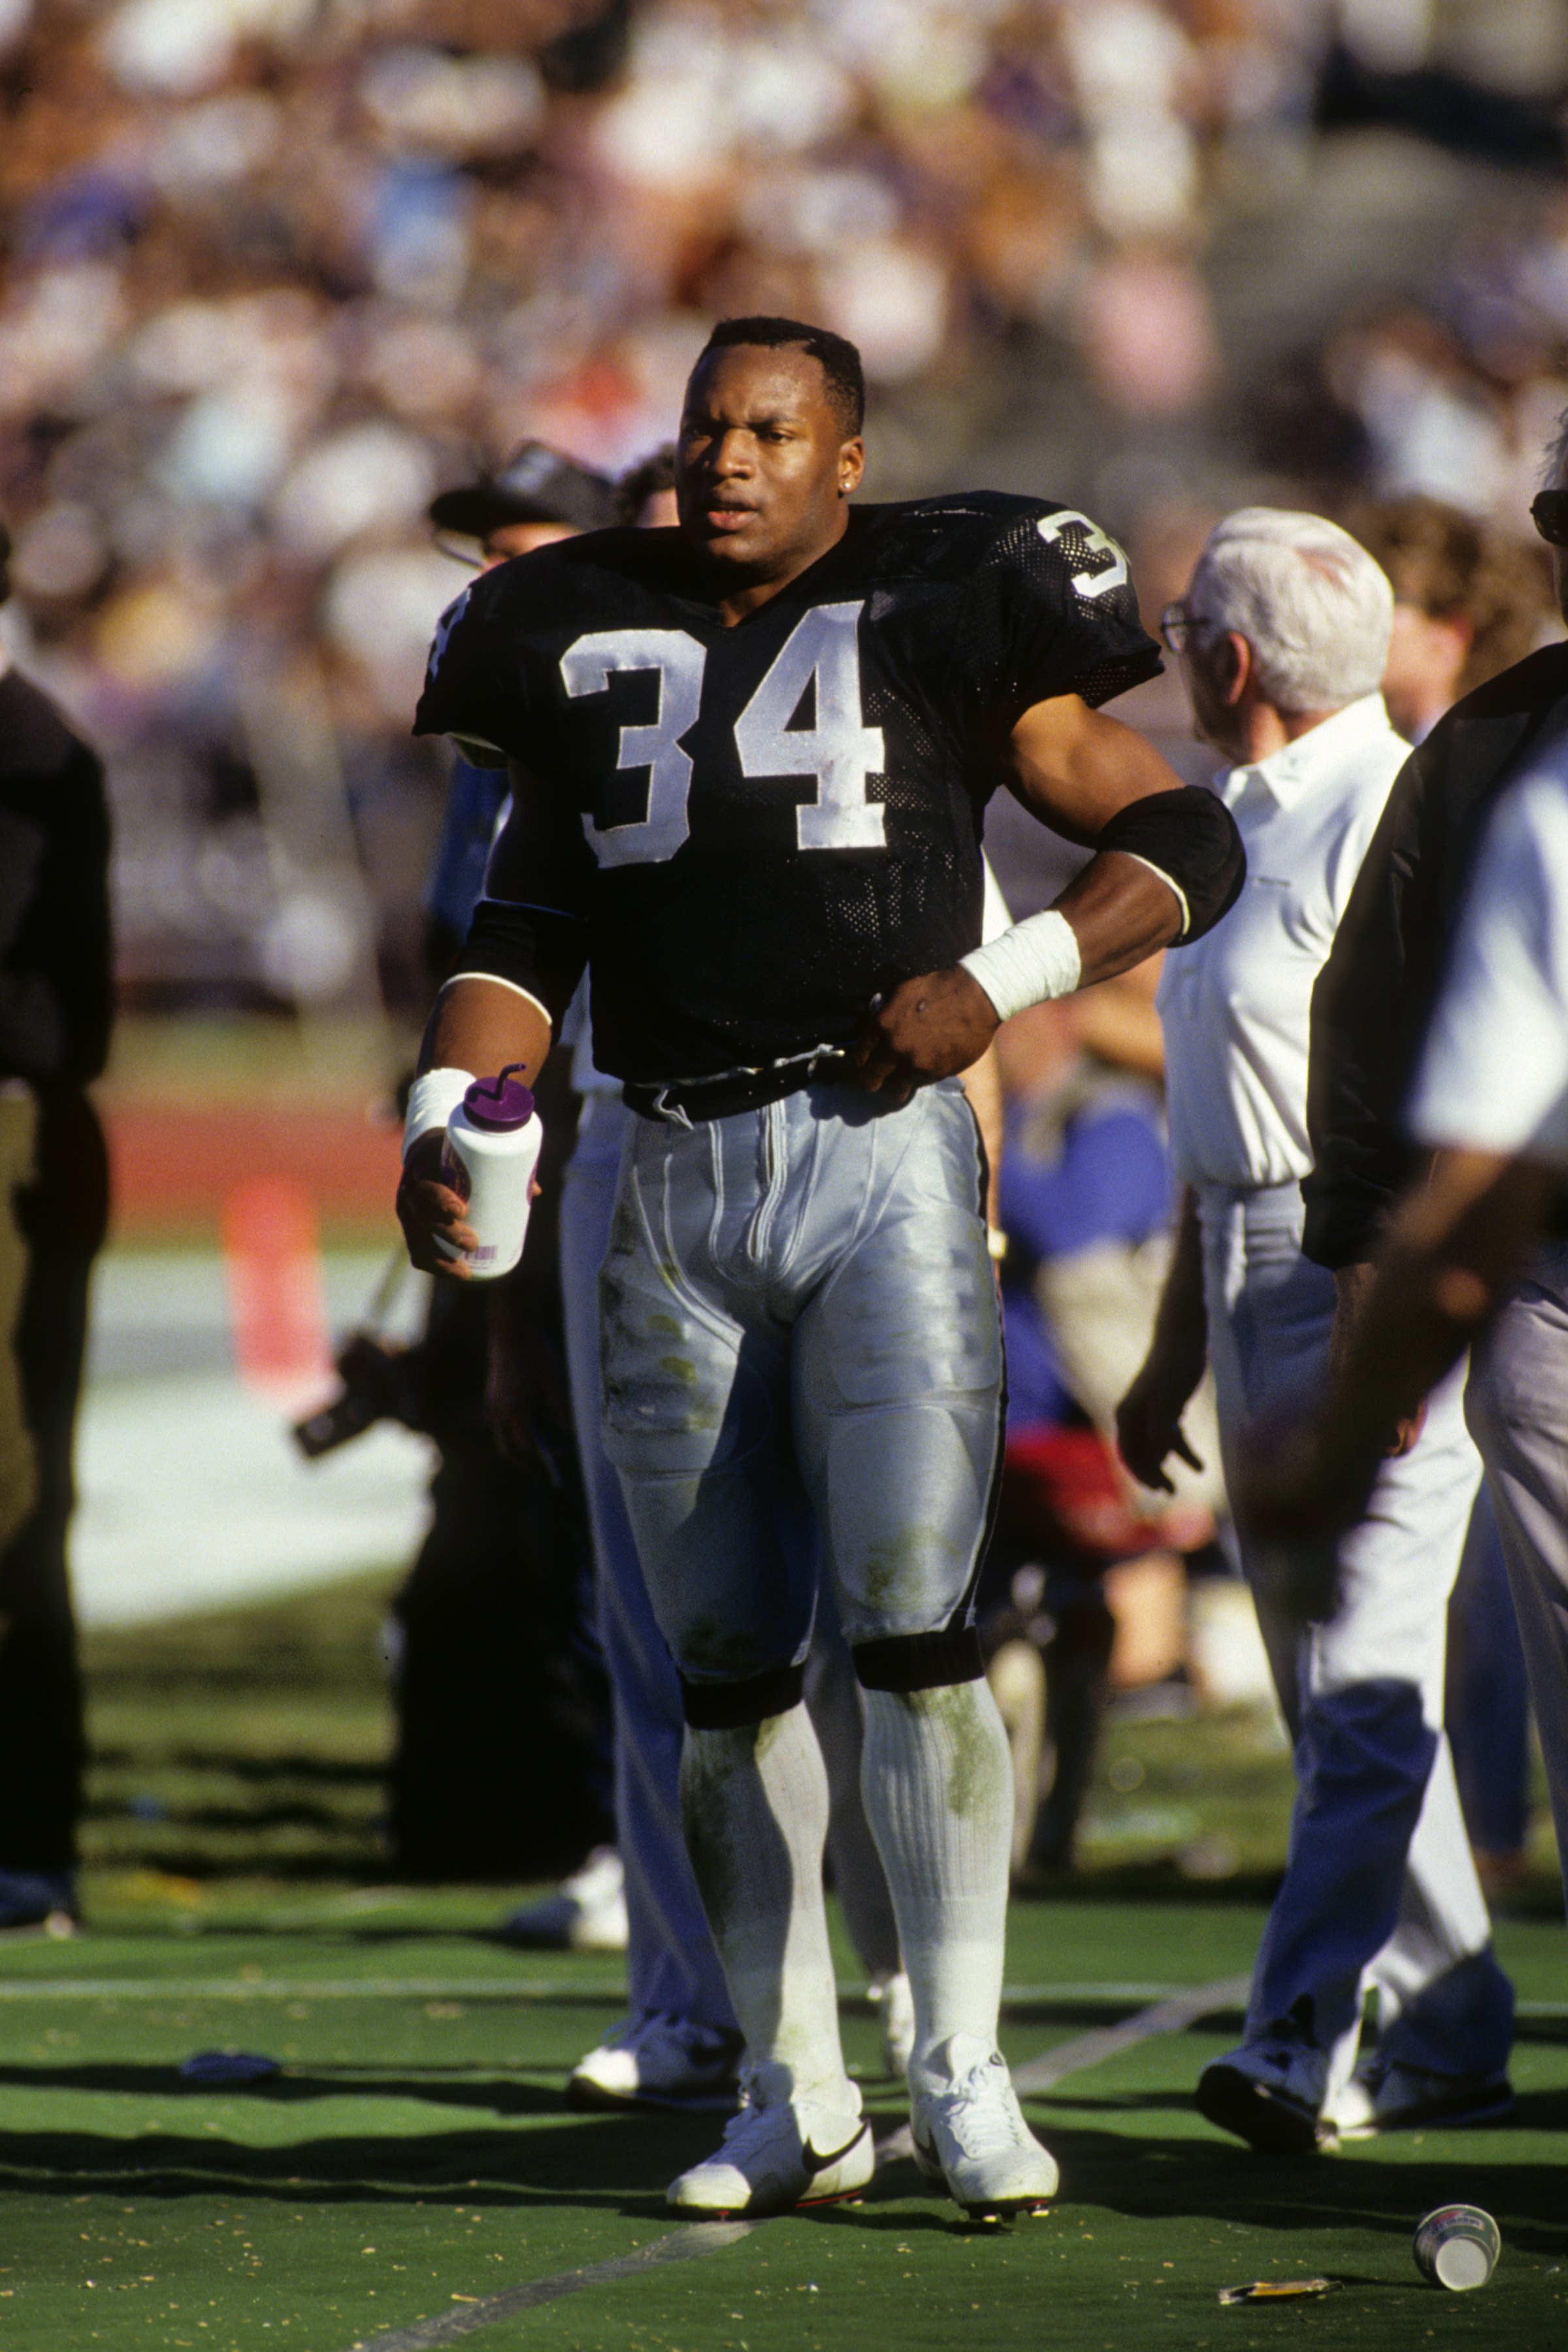 Raiders' Bo Jackson One of the NFL's Most Explosive and Entertaining